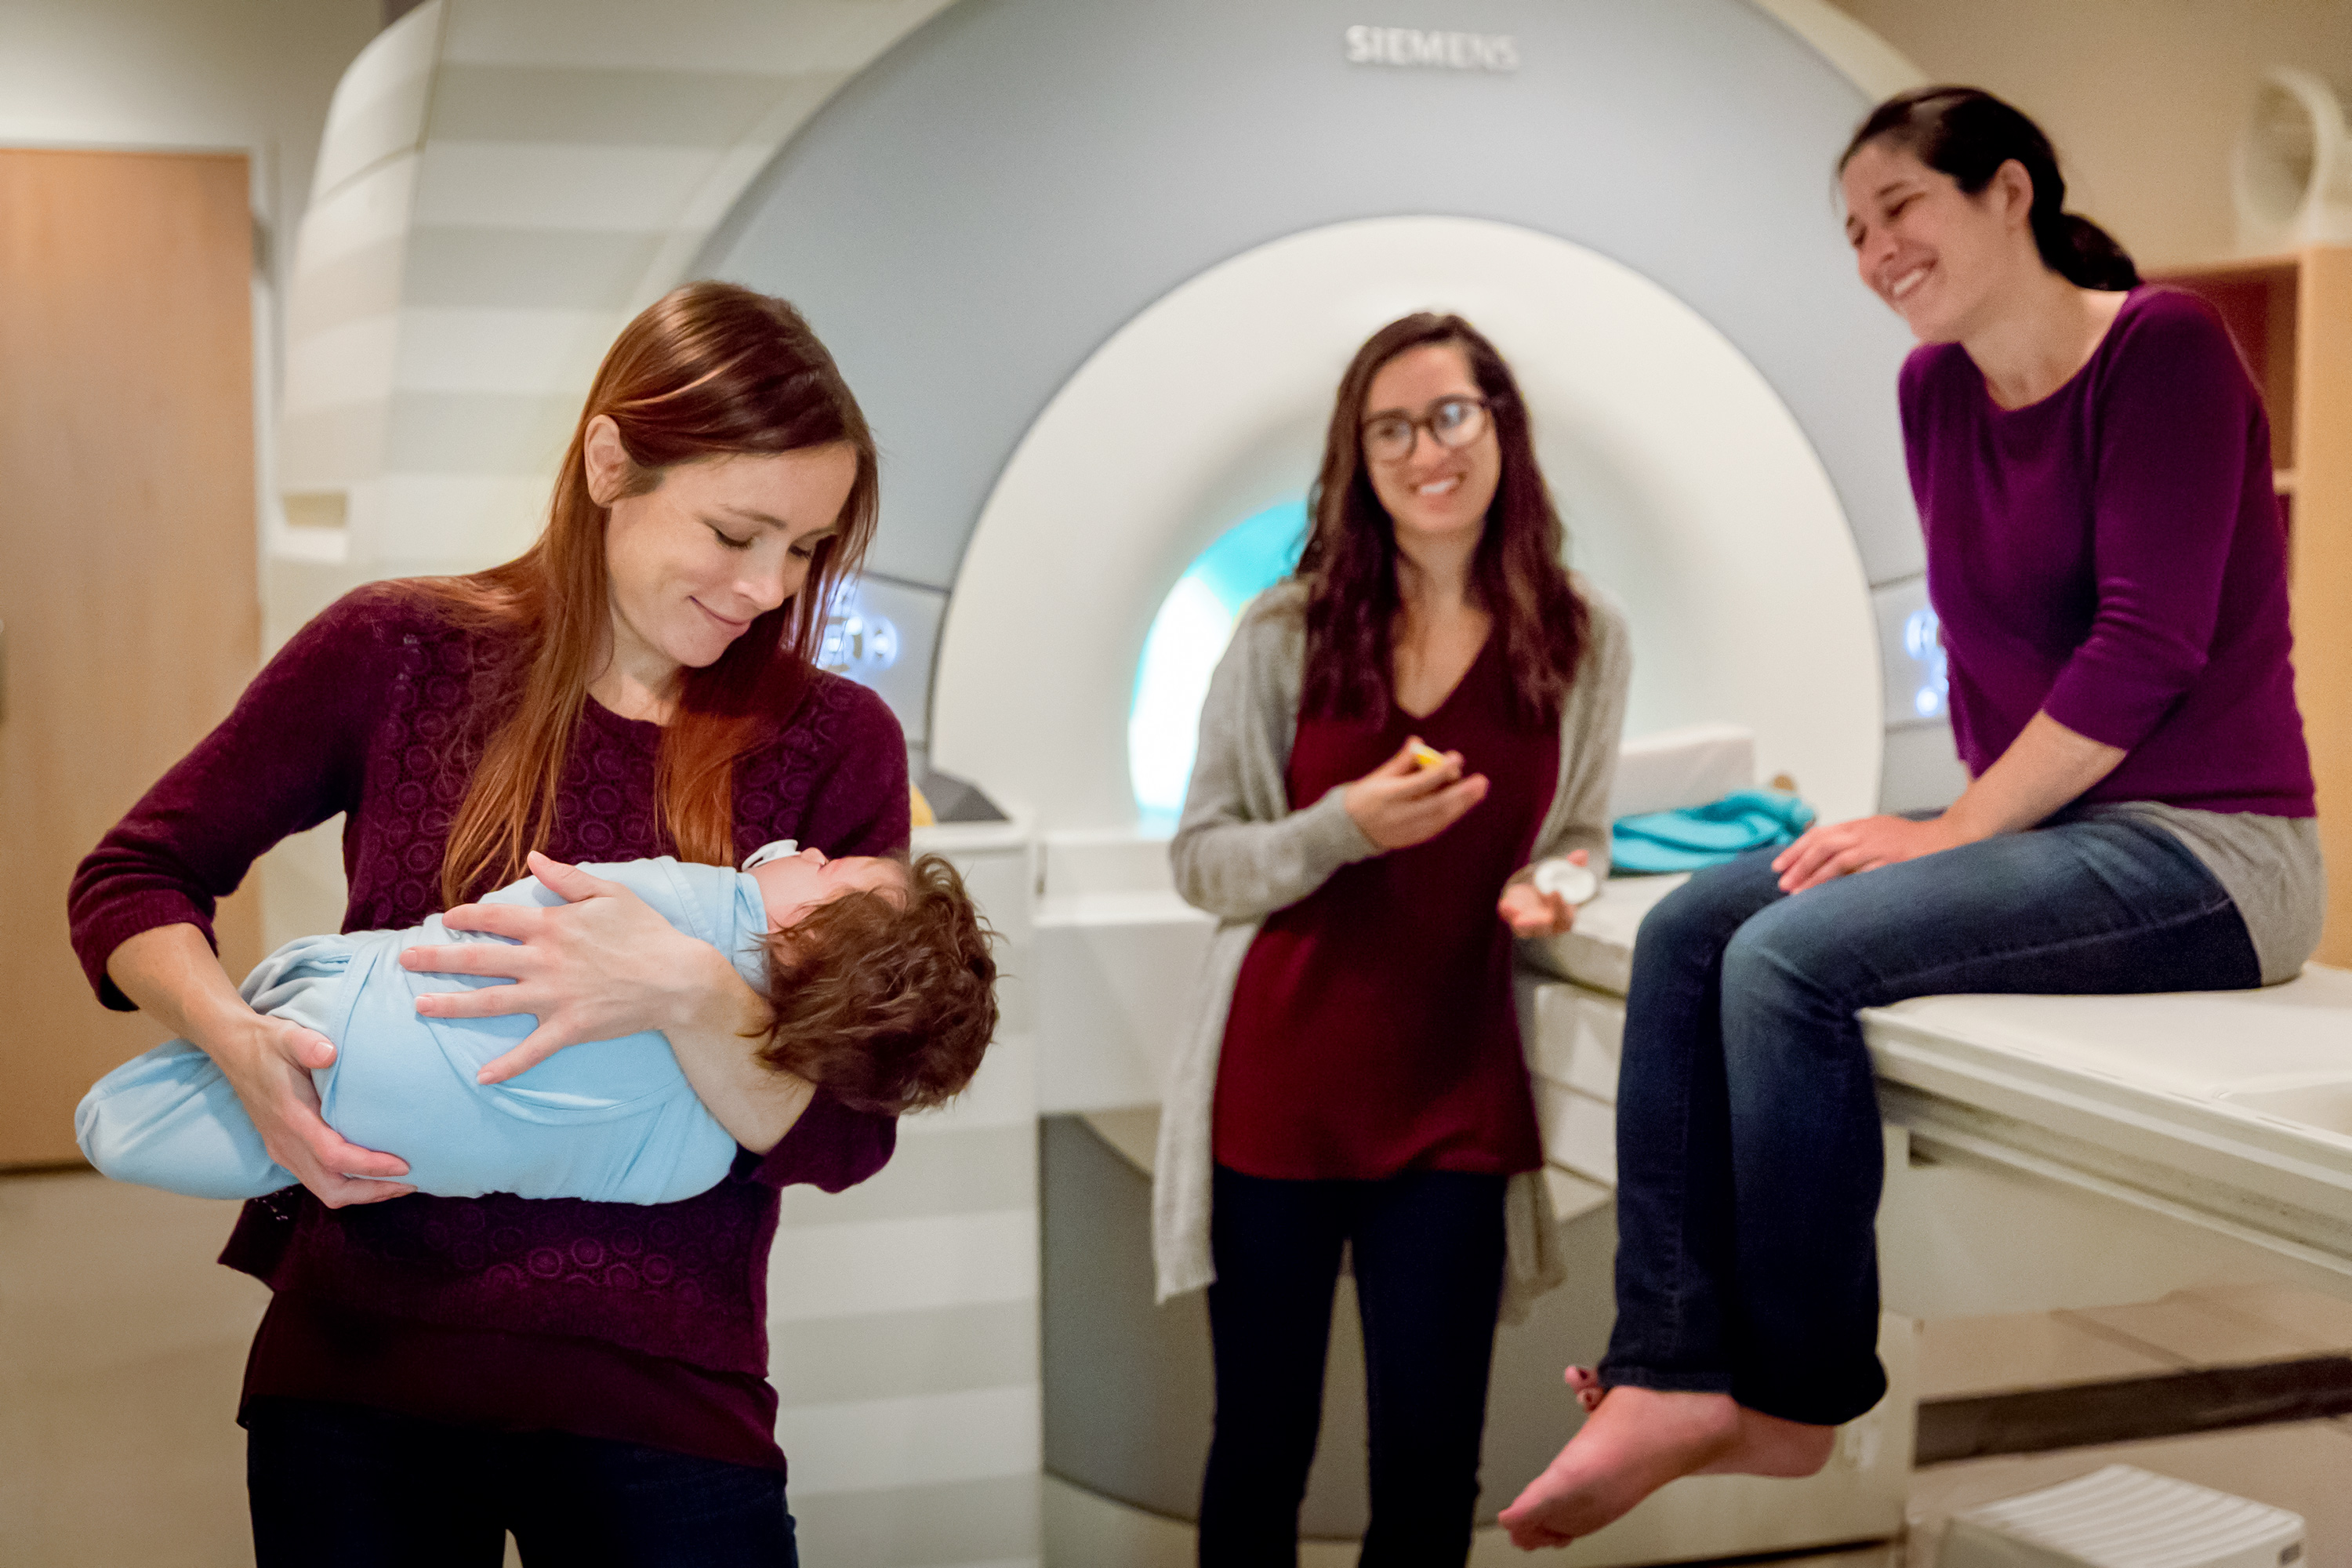 Heather Kosakowski holds an infant who is about to be scanned in an fMRI machine at the McGovern Institute for
Brain Research.